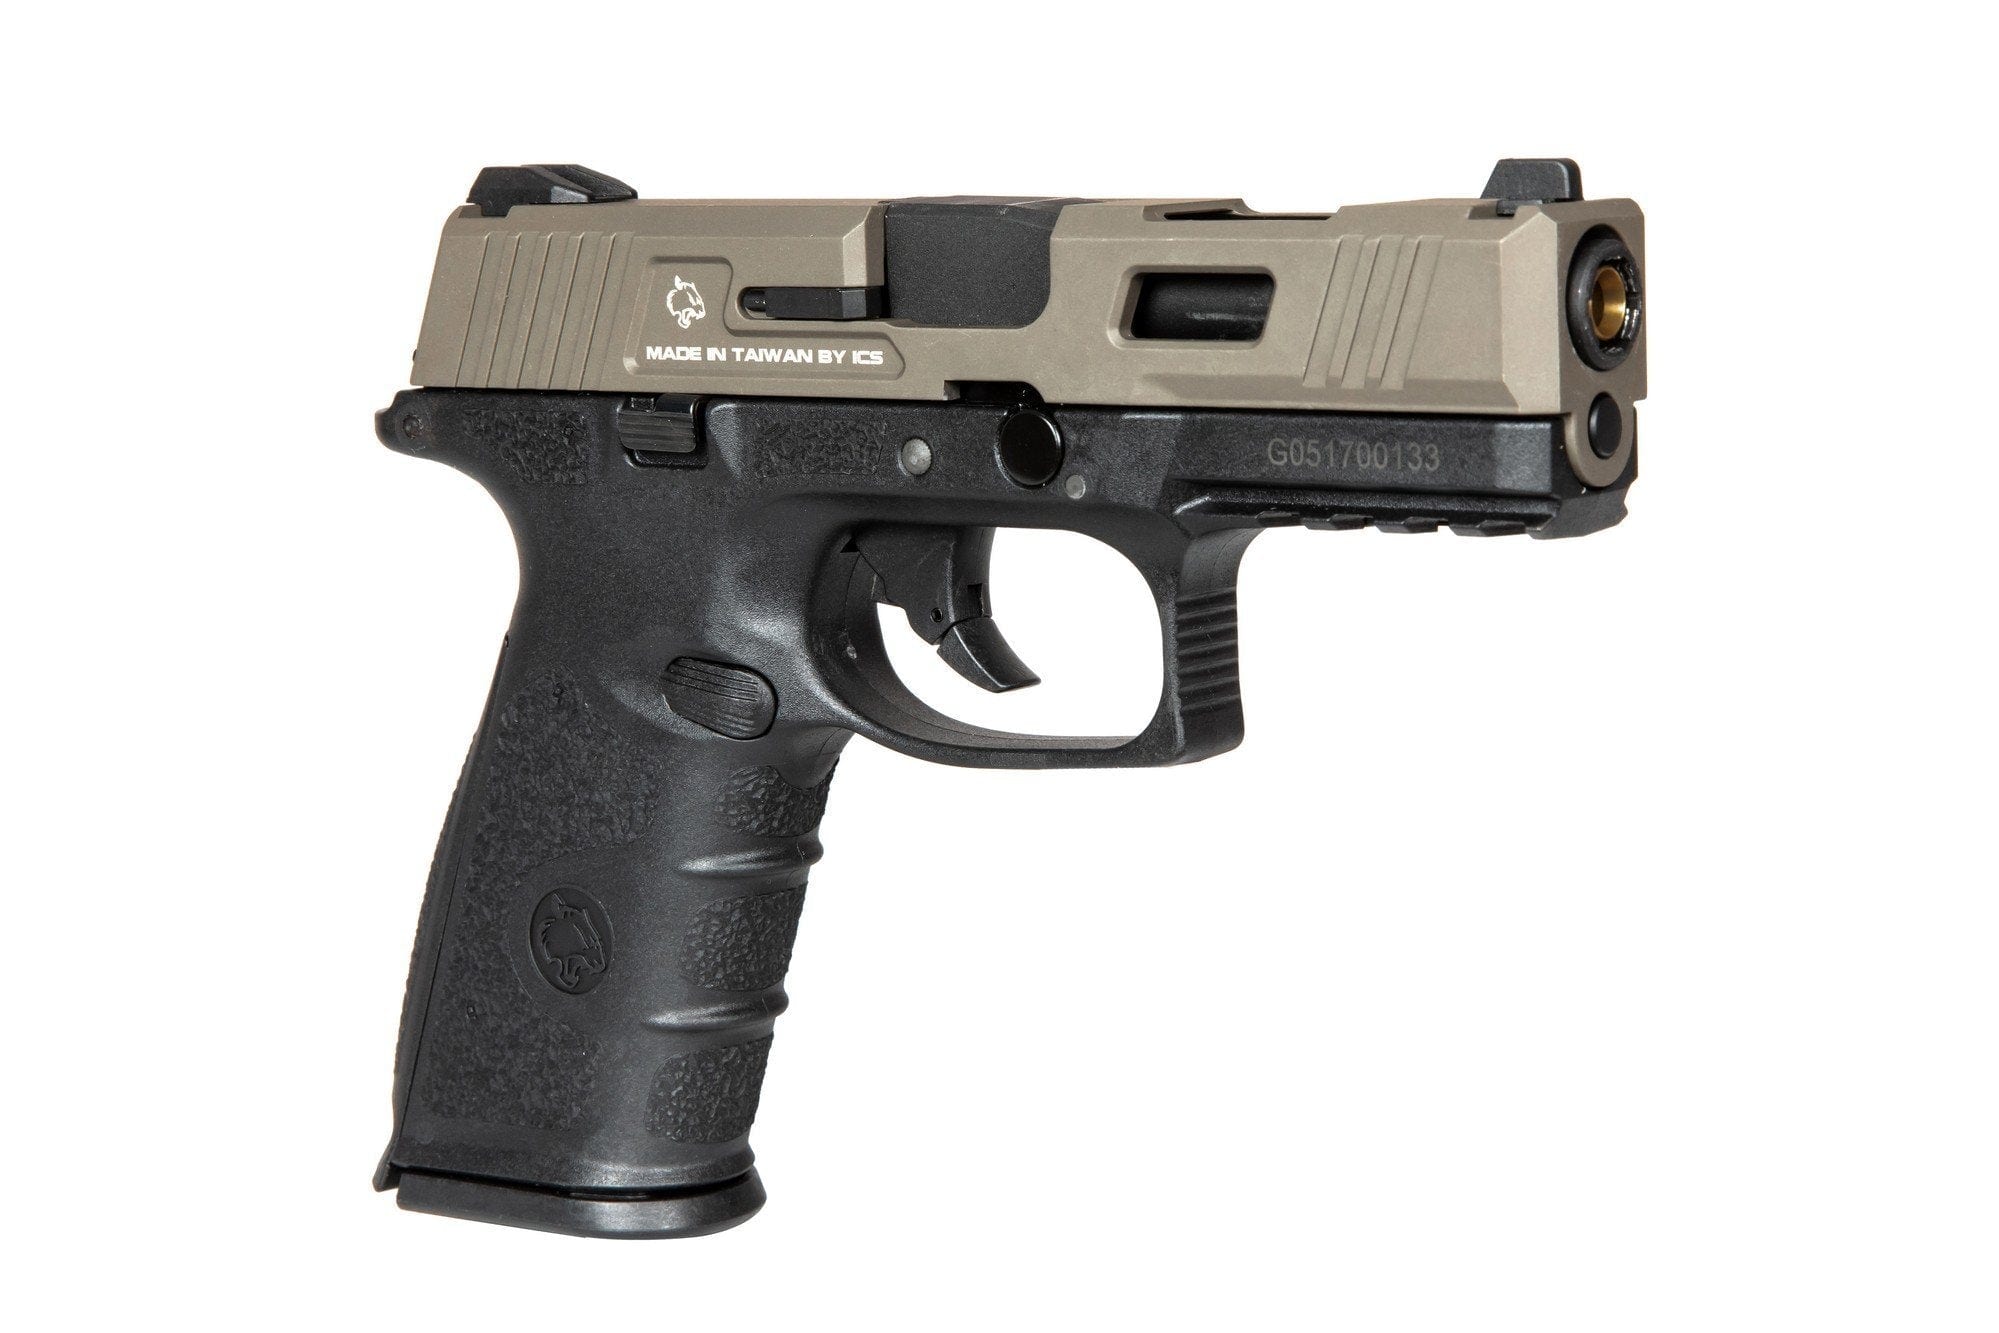 BLE-XFG Pistol Replica - black / tan by ICS on Airsoft Mania Europe